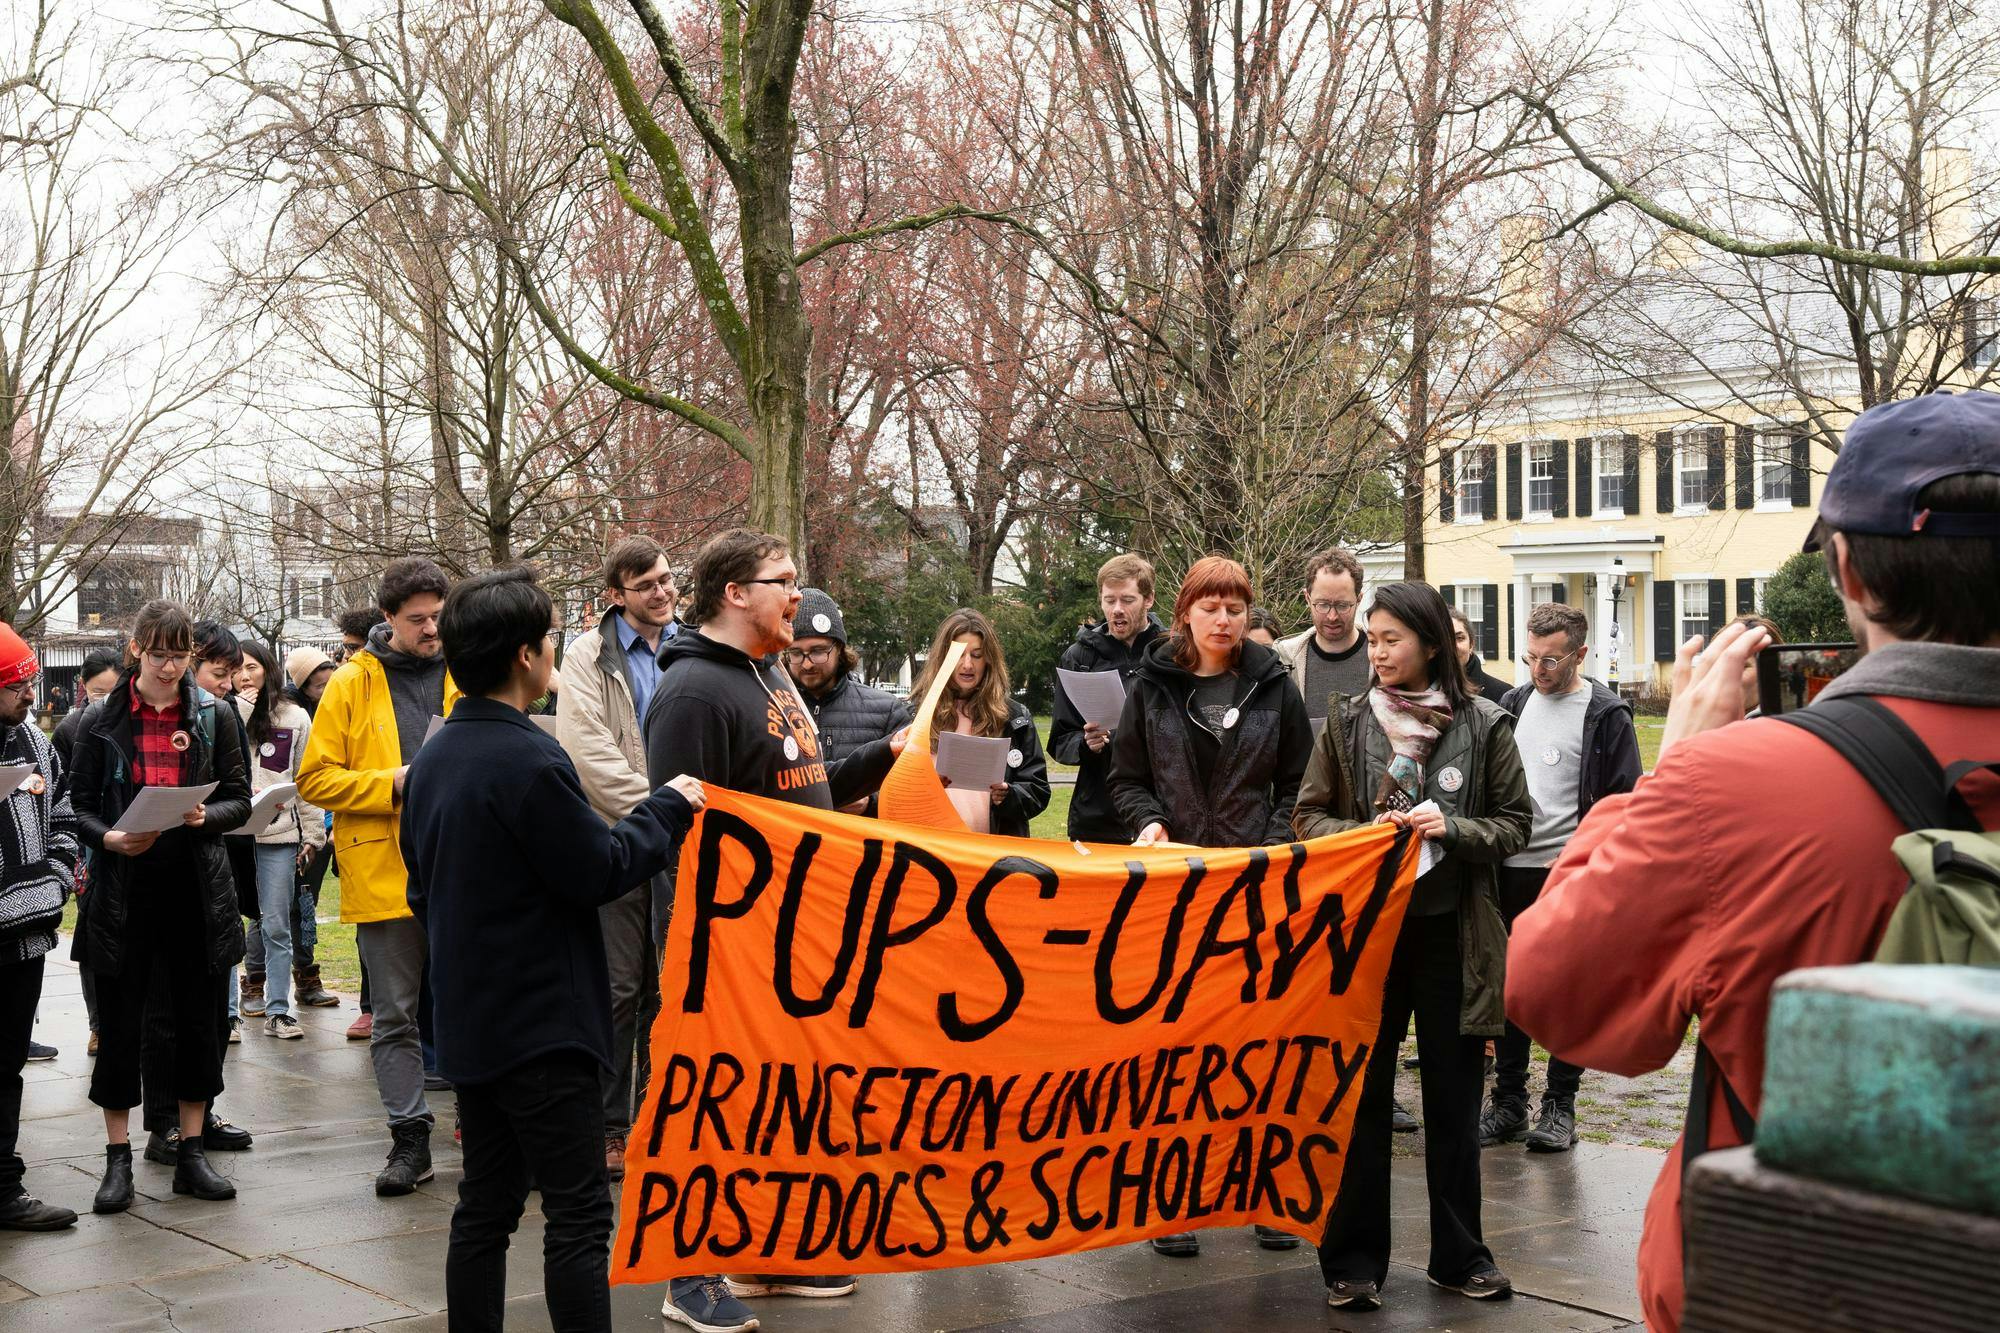 A crowd of several dozen people hold a large orange banner that reads “PUPS-UAW PRINCETON UNIVERSITY POSTDOCS AND SCHOLARS”